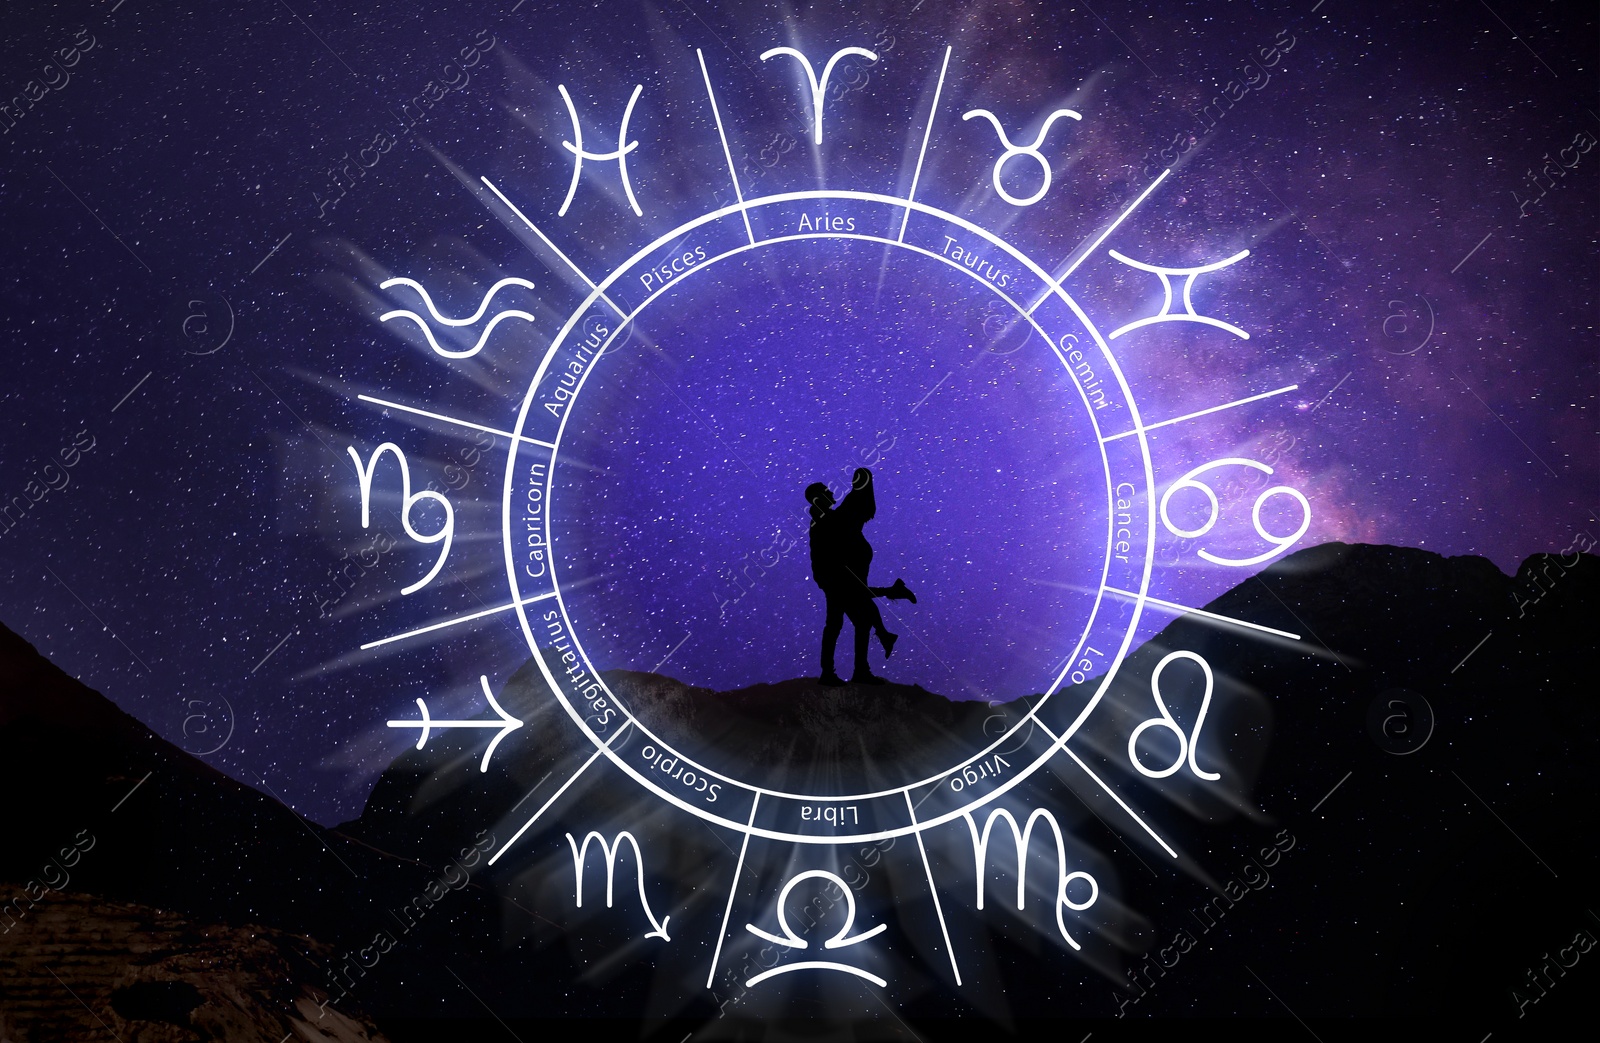 Image of Zodiac wheel and photo of couple in mountains under starry sky at night